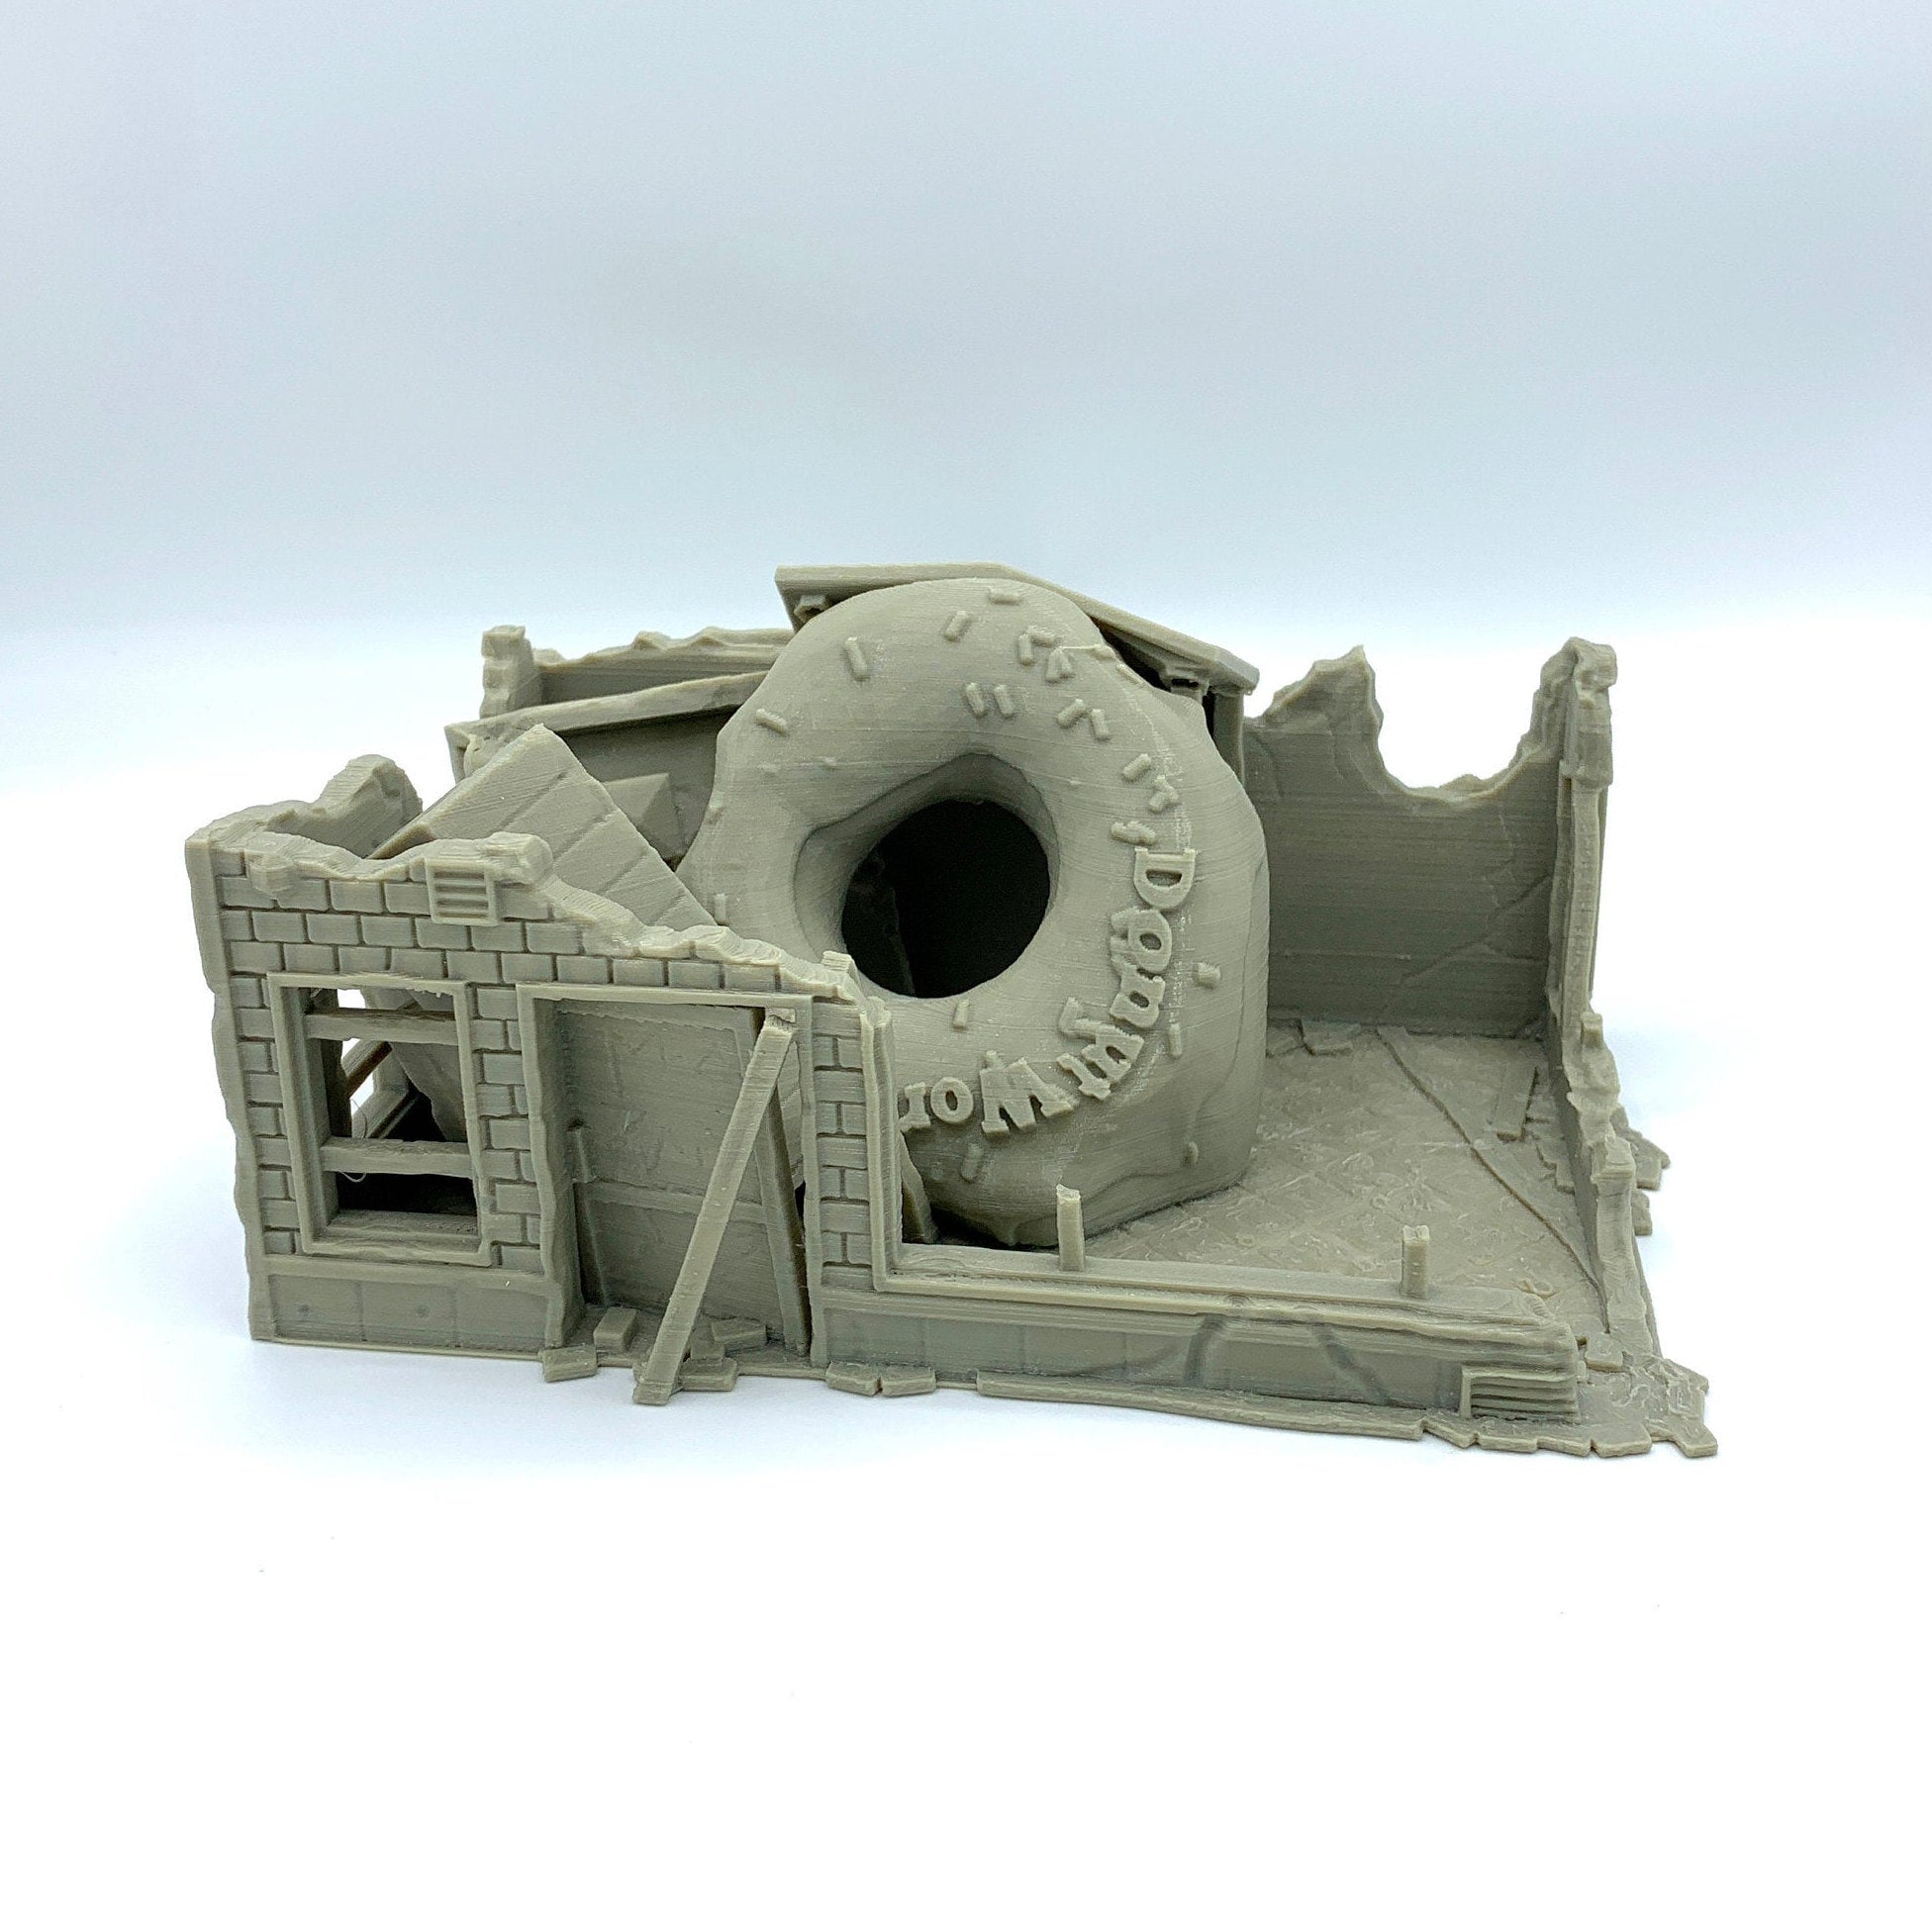 3d Printed Ruined Donut Shop / Crisis Protocol Compatible Option / Corvus Games Terrain Licensed Printer / Print to Order